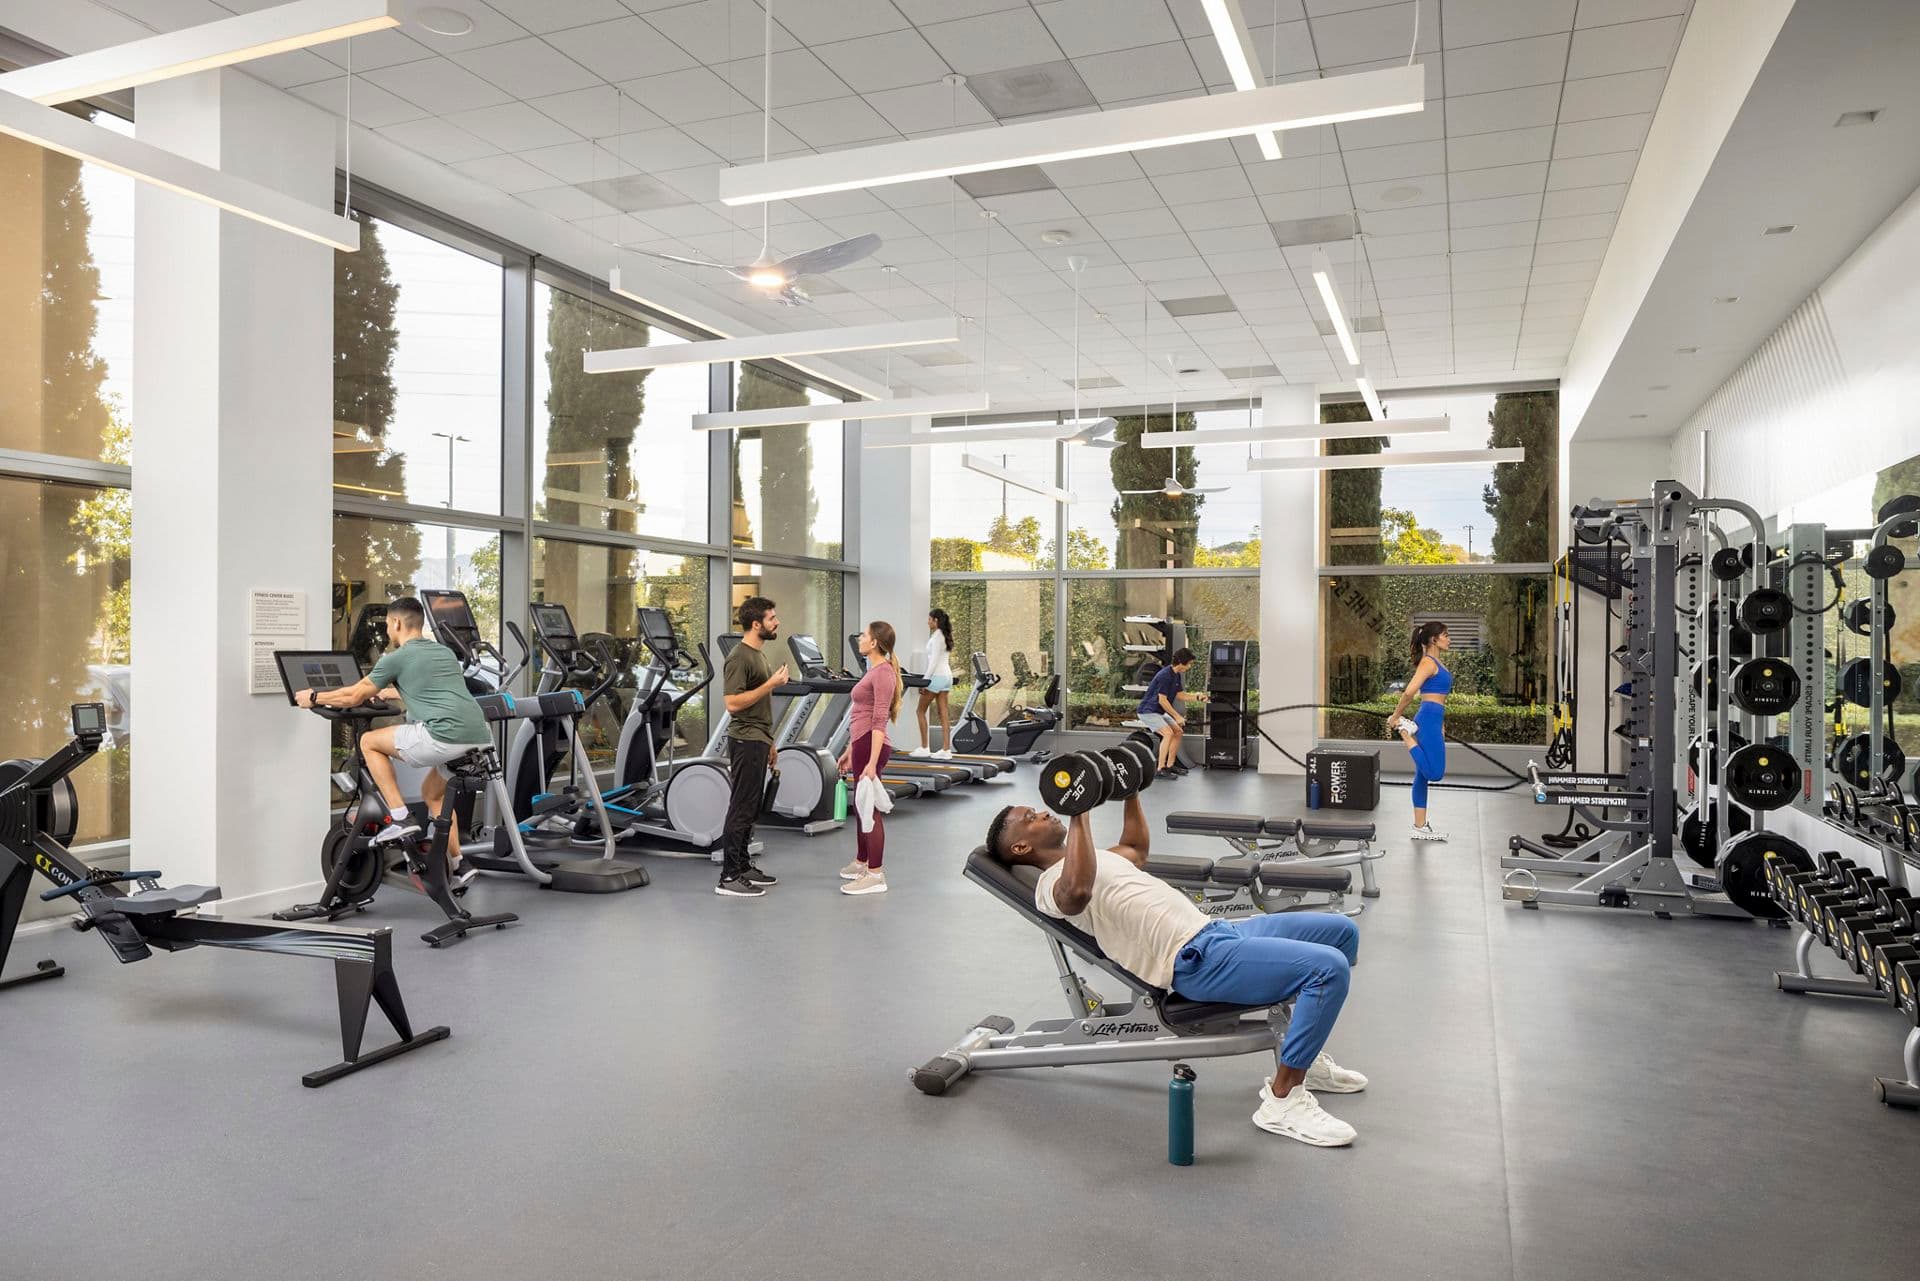 Lifestyle photography of the Kinetic fitness center offering at Santa Clara Gateway in Santa Clara, CA.